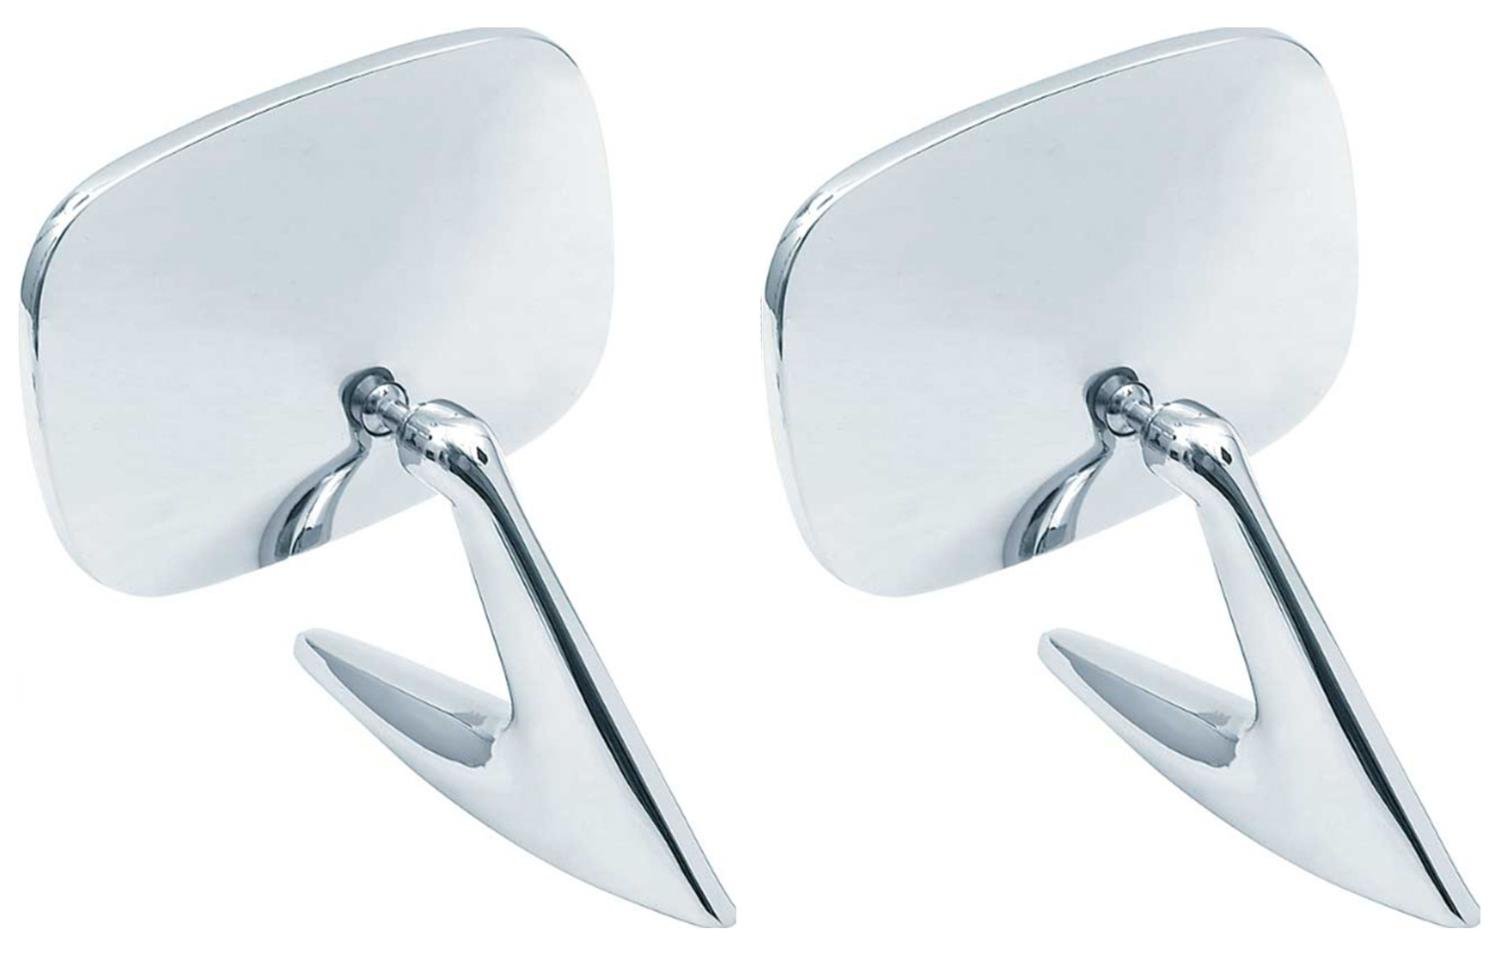 Side View Mirror Kit for 1970-1981 Chevy Camaro, Pontiac Firebird [Left/Driver & Right/Passenger Side]